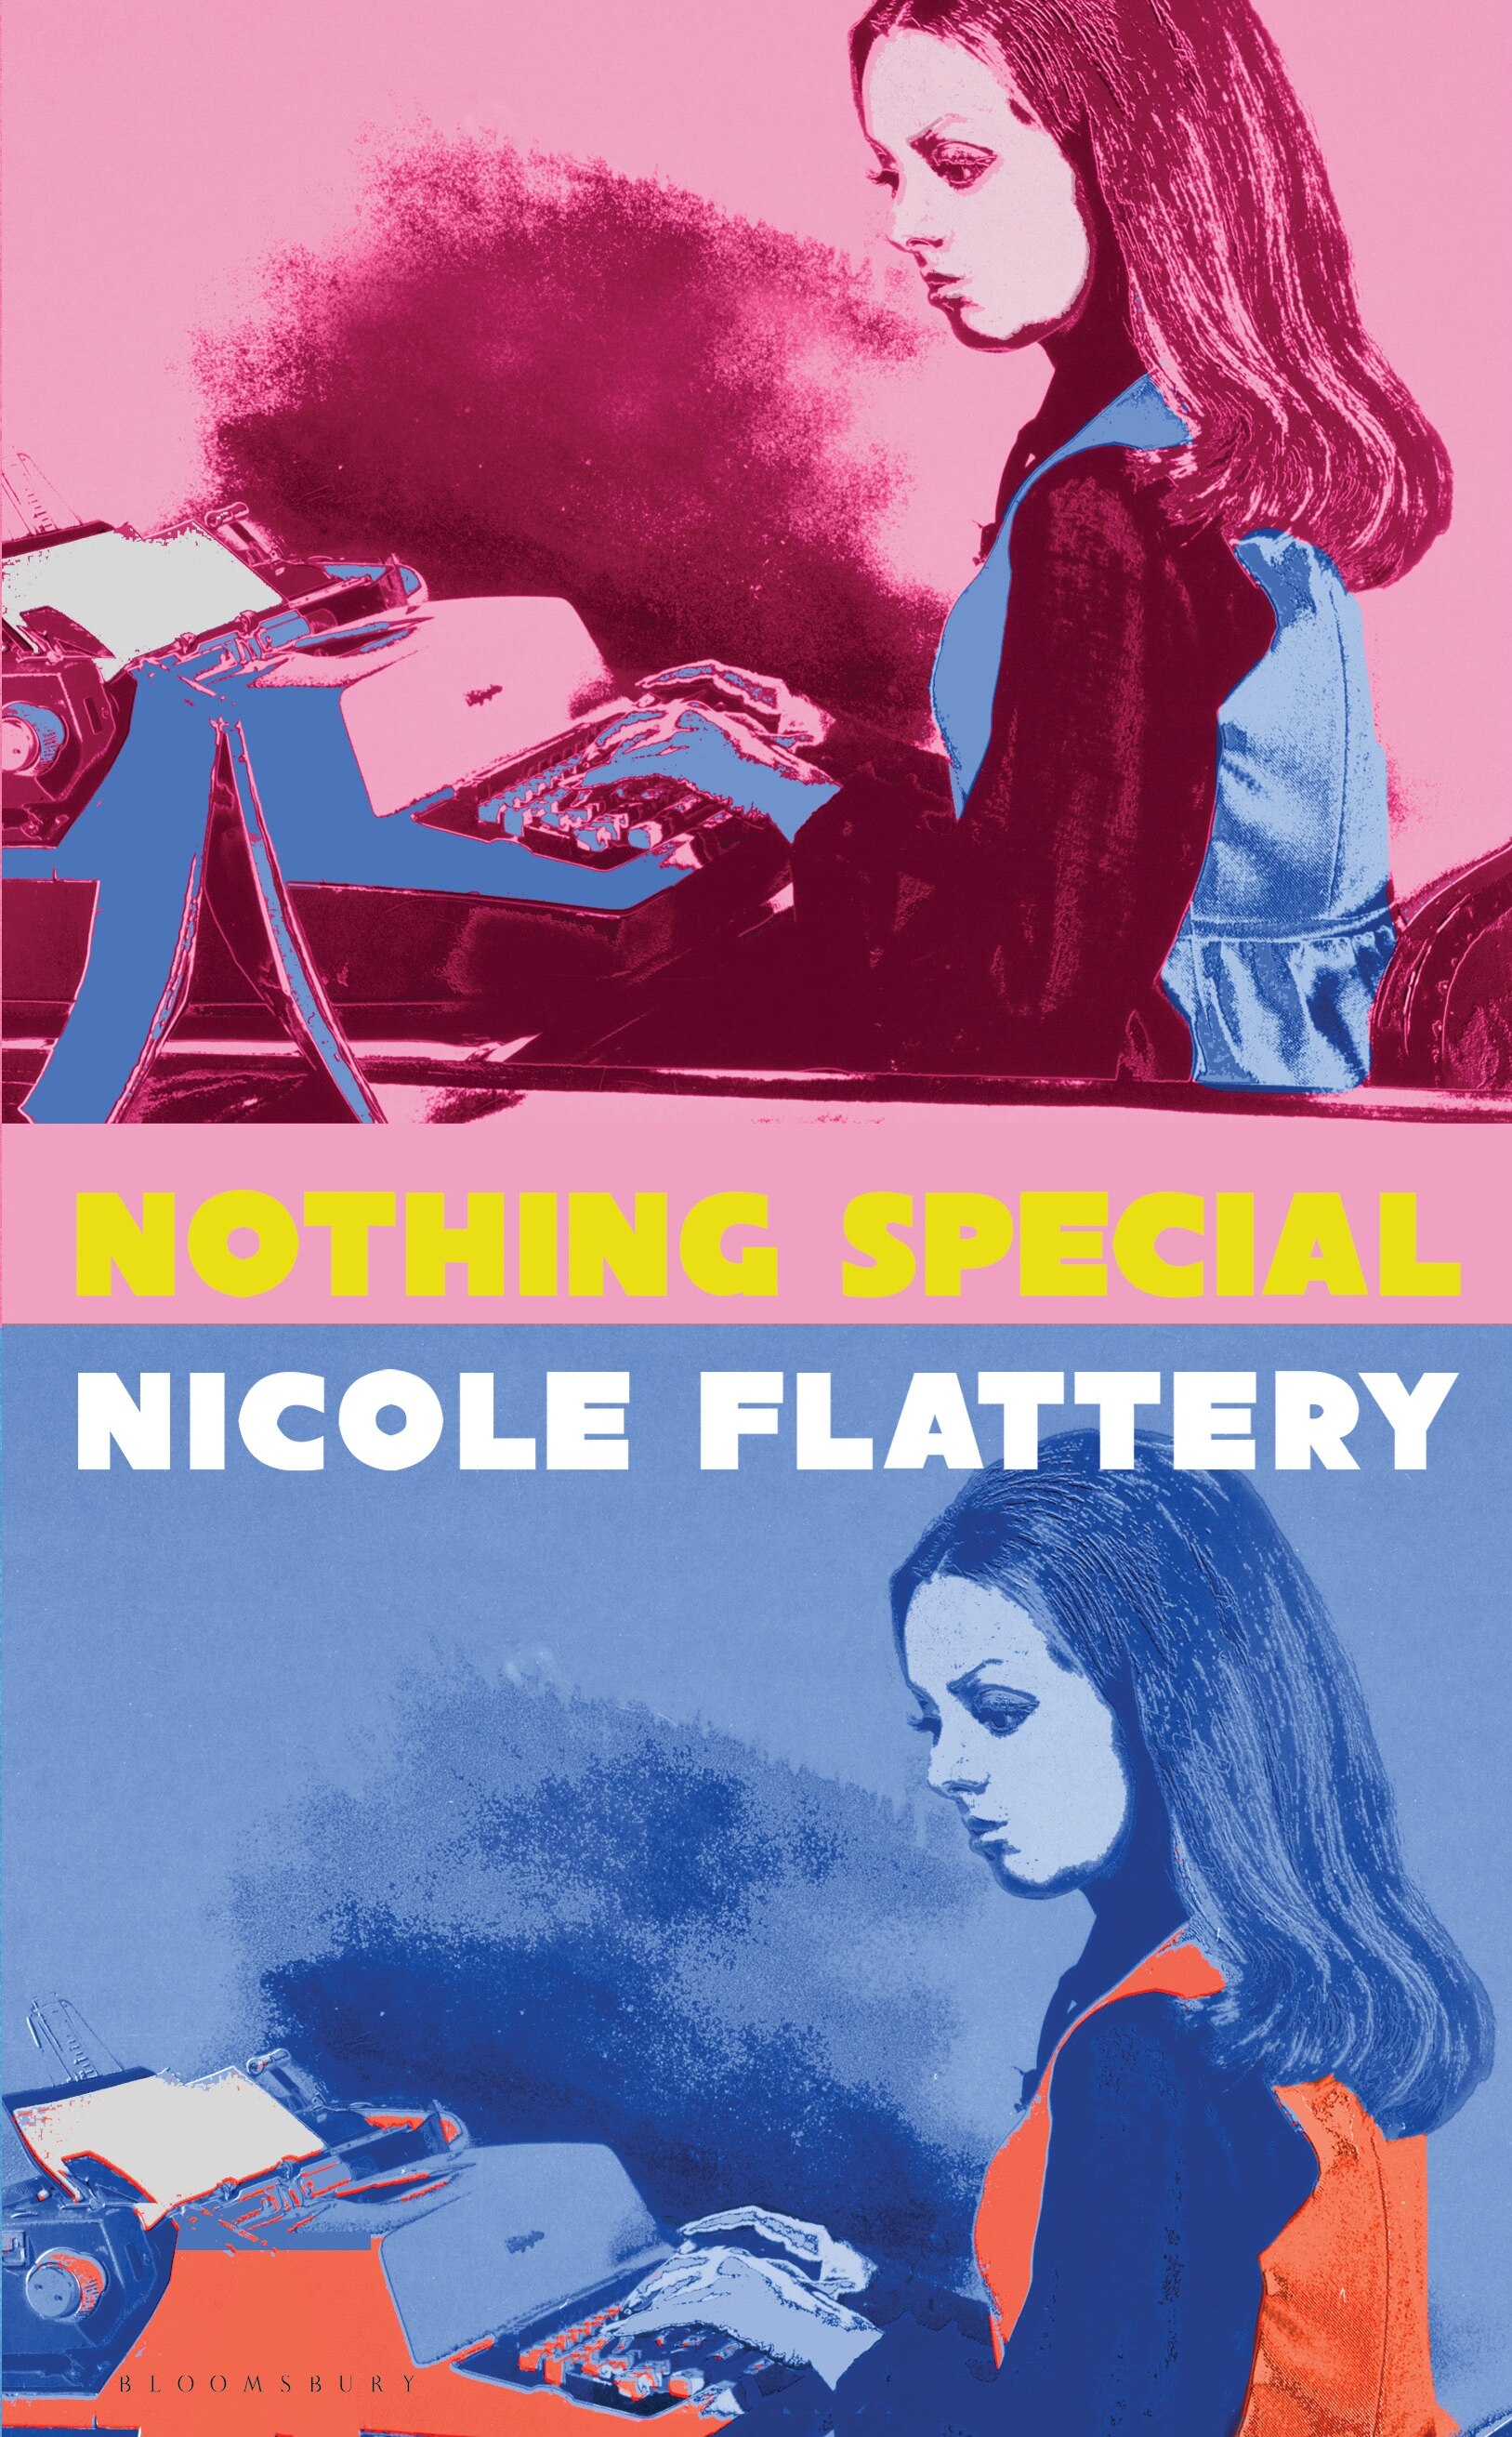 A book cover featuring a double image of a long-haired woman sitting at a typewriter; the top is pink-hued and bottom image blue